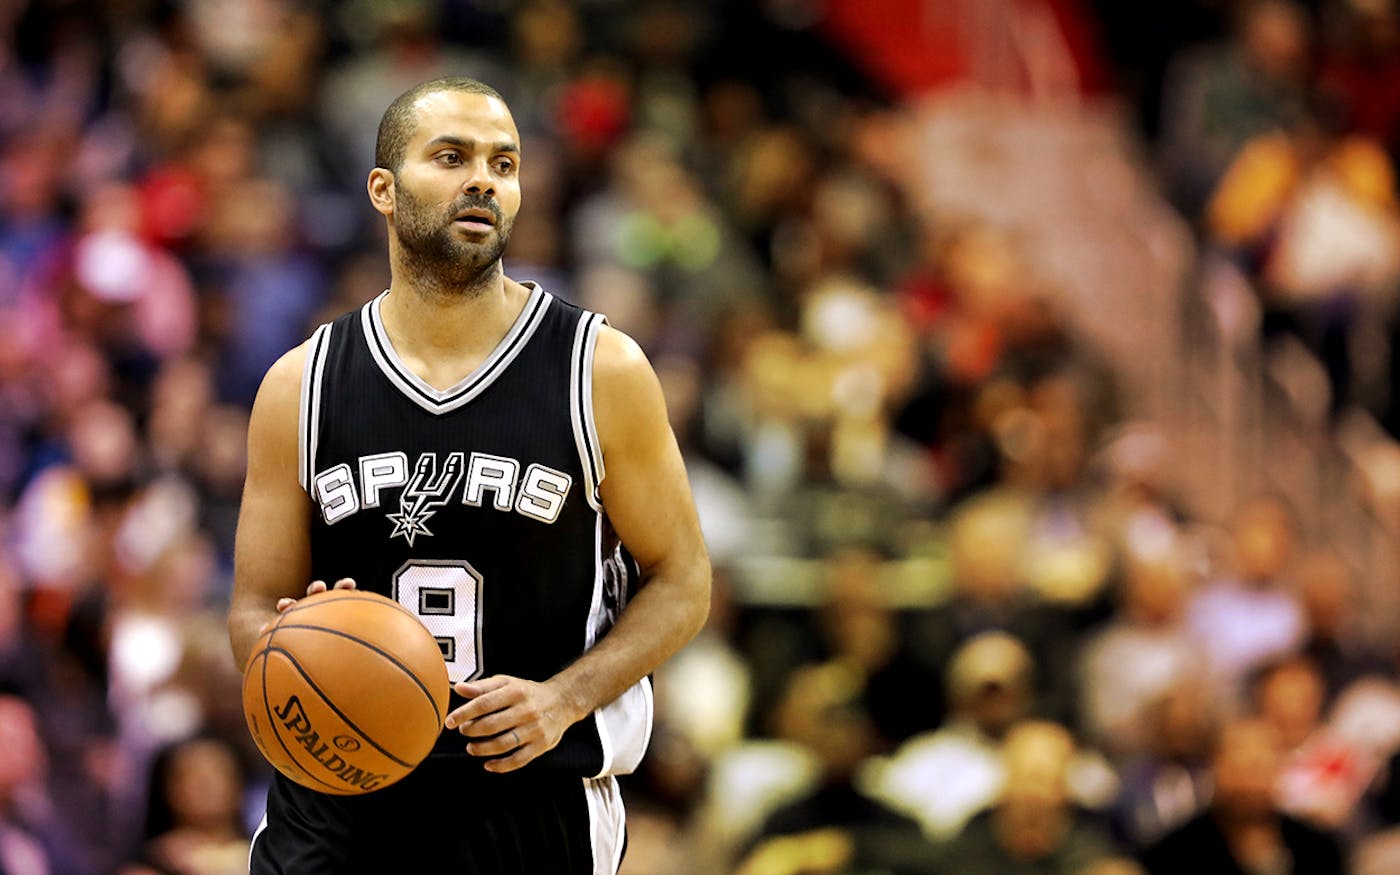 Brothers for life': Former Spurs honor Tony Parker on his jersey retirement  night